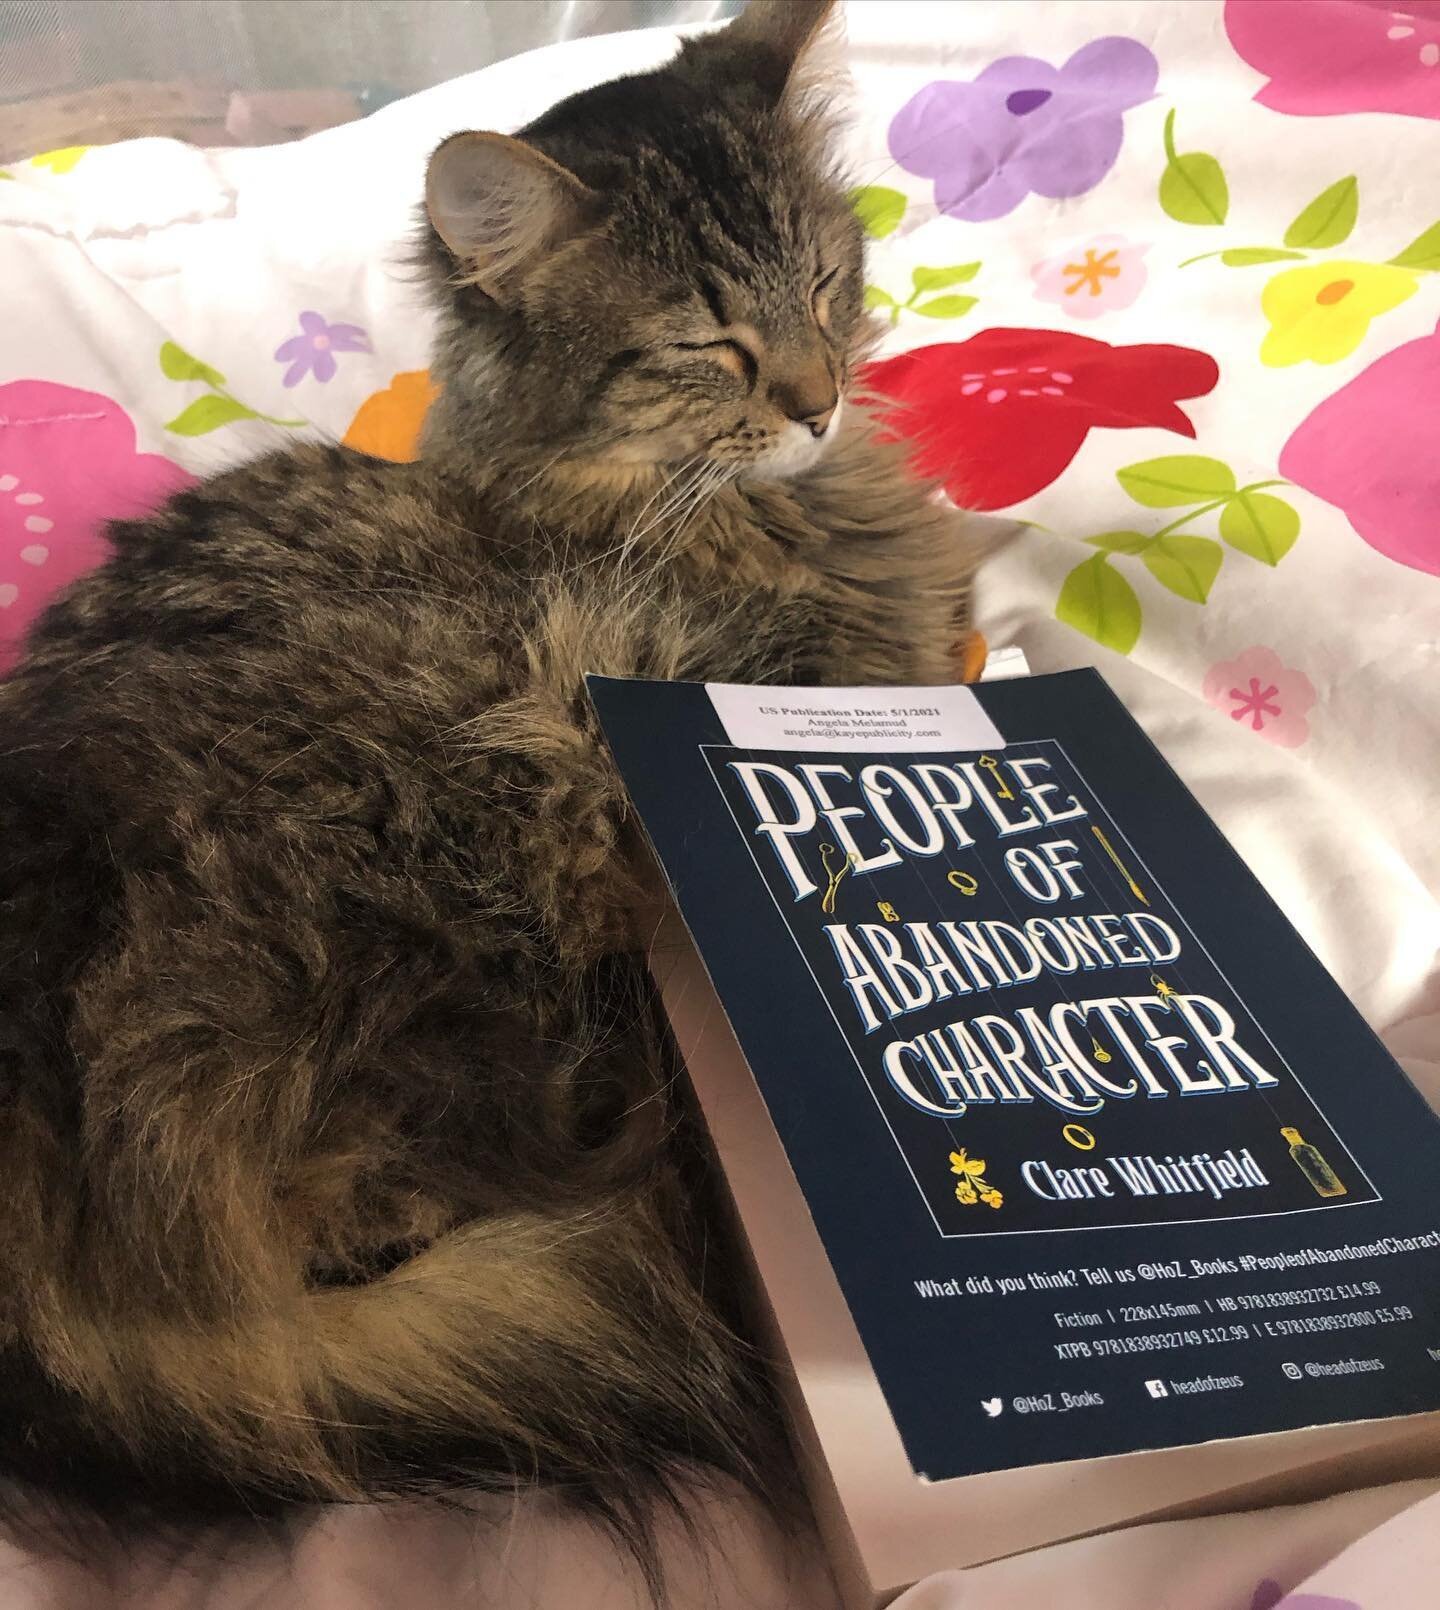 Just finished up an interview and now I&rsquo;m finishing up a book with my cat Bernie. Everything is so much better with cats, isn&rsquo;t it? 😸📚
.
.
.
#peopleofabandonedcharacter #interview #reading #historicalfiction #cat #catsofinstagram #books